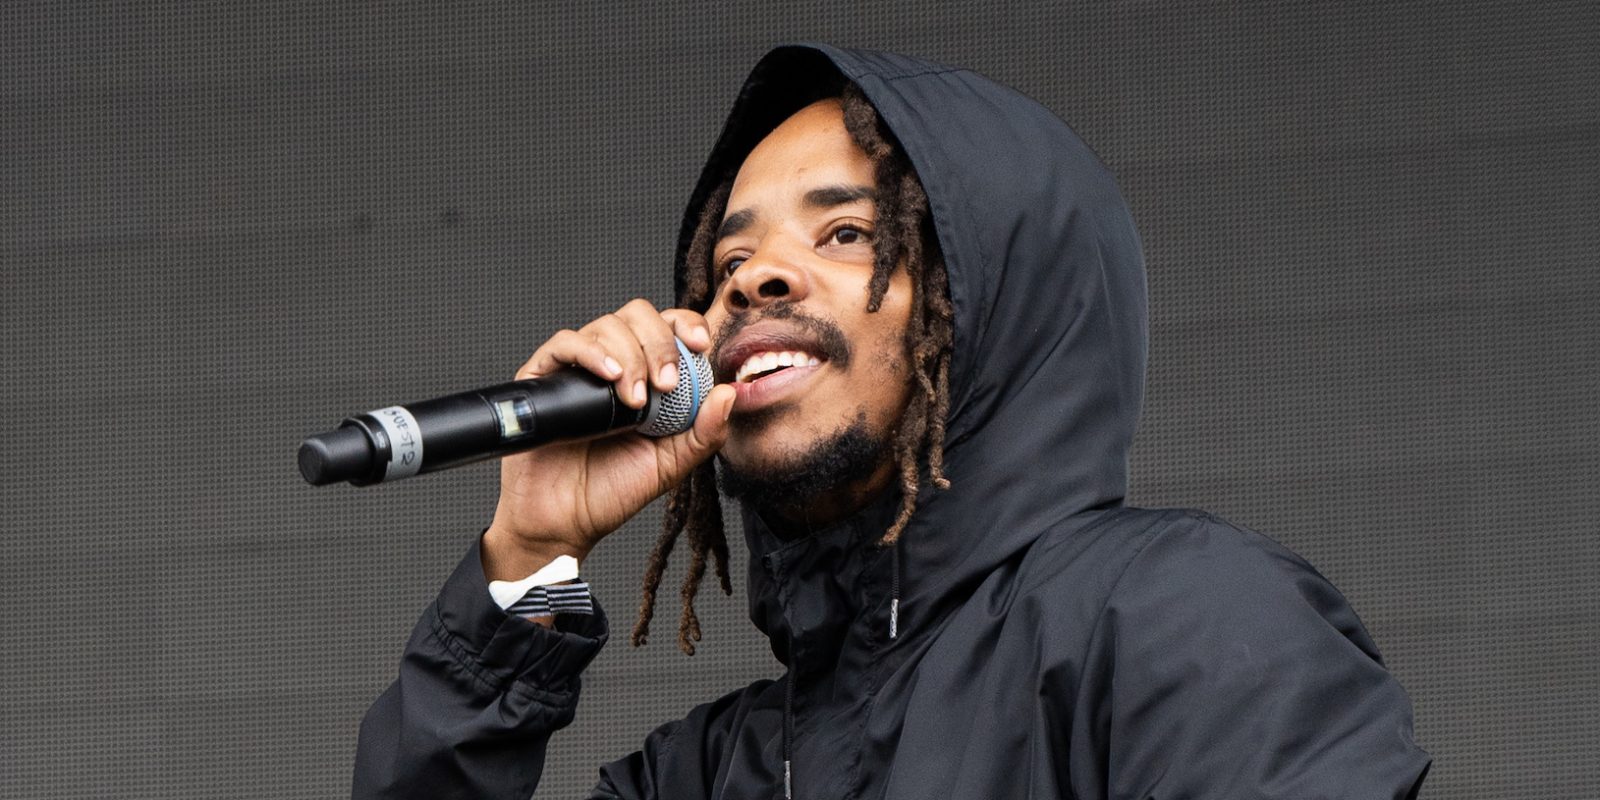 LONDON, ENGLAND - JUNE 07: Earl Sweatshirt performs onstage during Field Day Festival 2019 at Meridian Water on June 07, 2019 in London, England. (Photo by Lorne Thomson/Redferns)